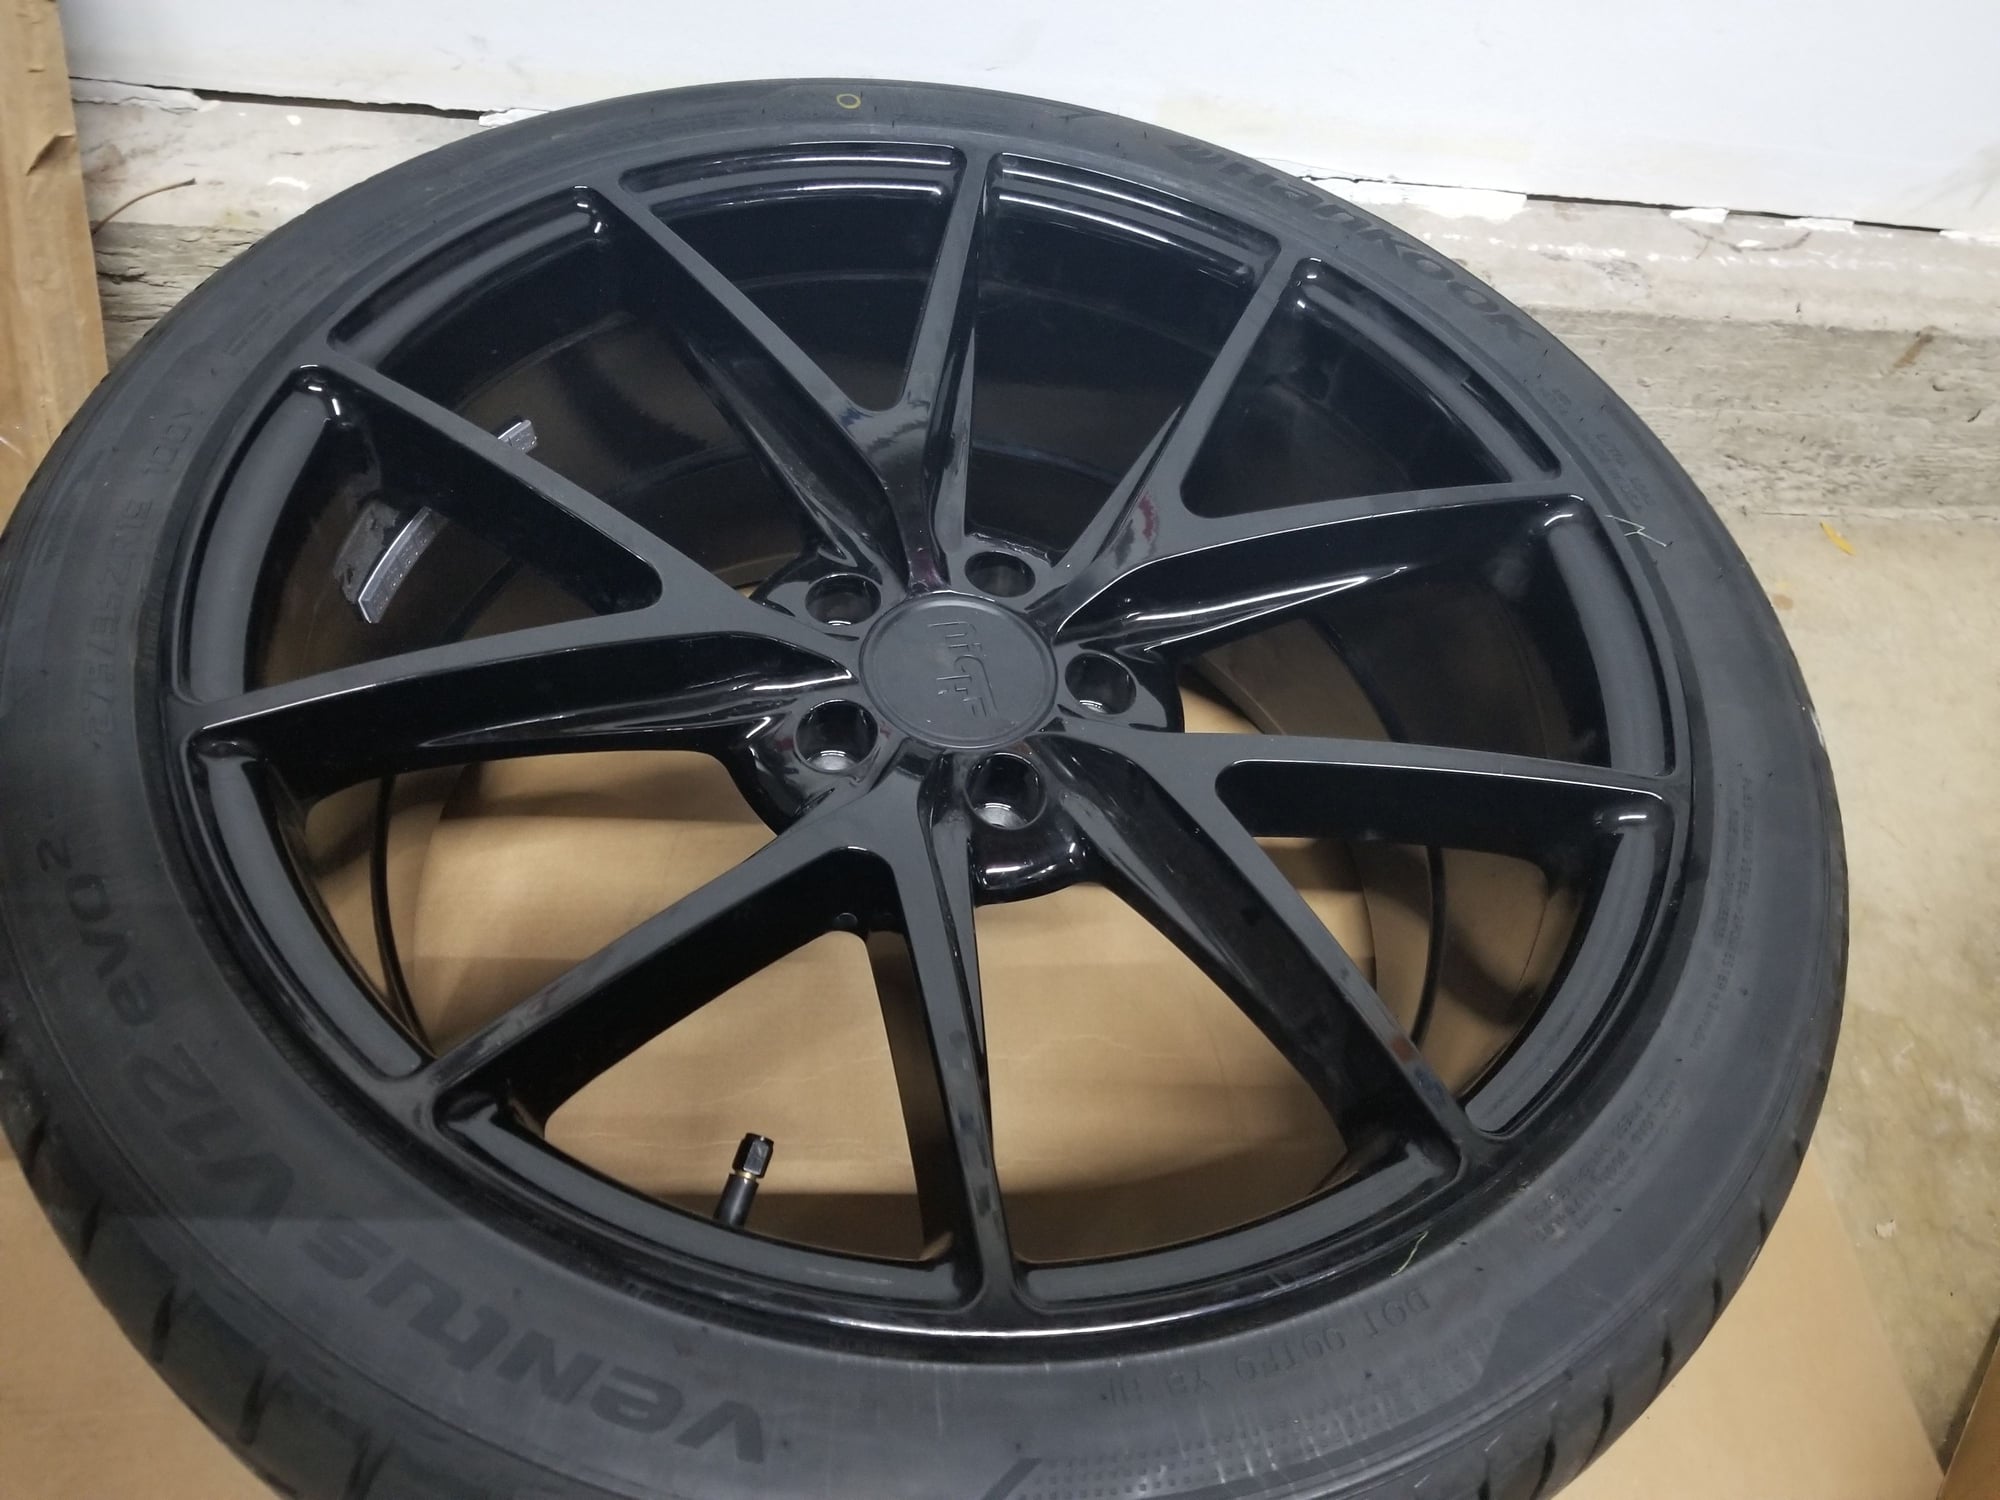 Wheels and Tires/Axles - 4 Staggered 19" Wheel and Tire Set From C63 Amg Mercedes - Used - 2007 to 2015 Mercedes-Benz C63 AMG - Schaumburg, IL 60193, United States